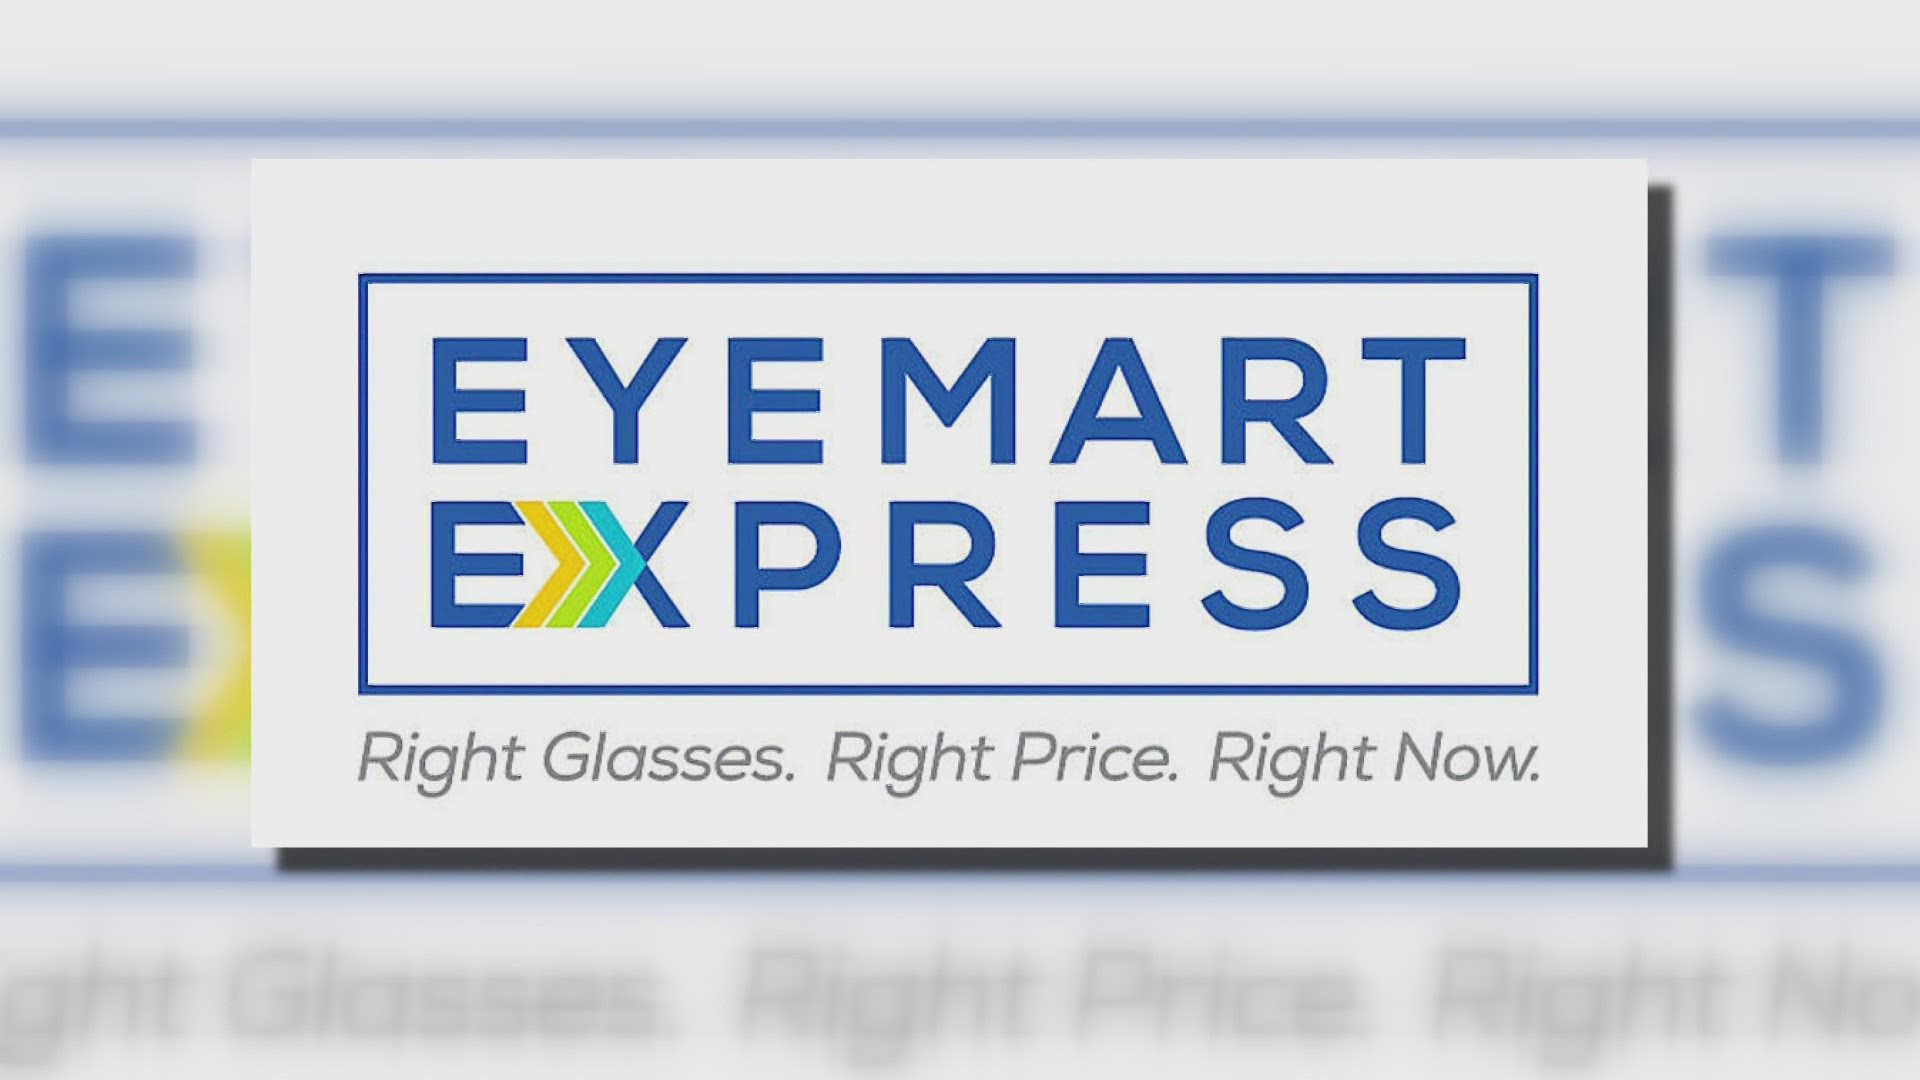 Eyemart Express is dedicated to helping people see better and the company is expanding its Grand Rapids market with a new location in Muskegon.